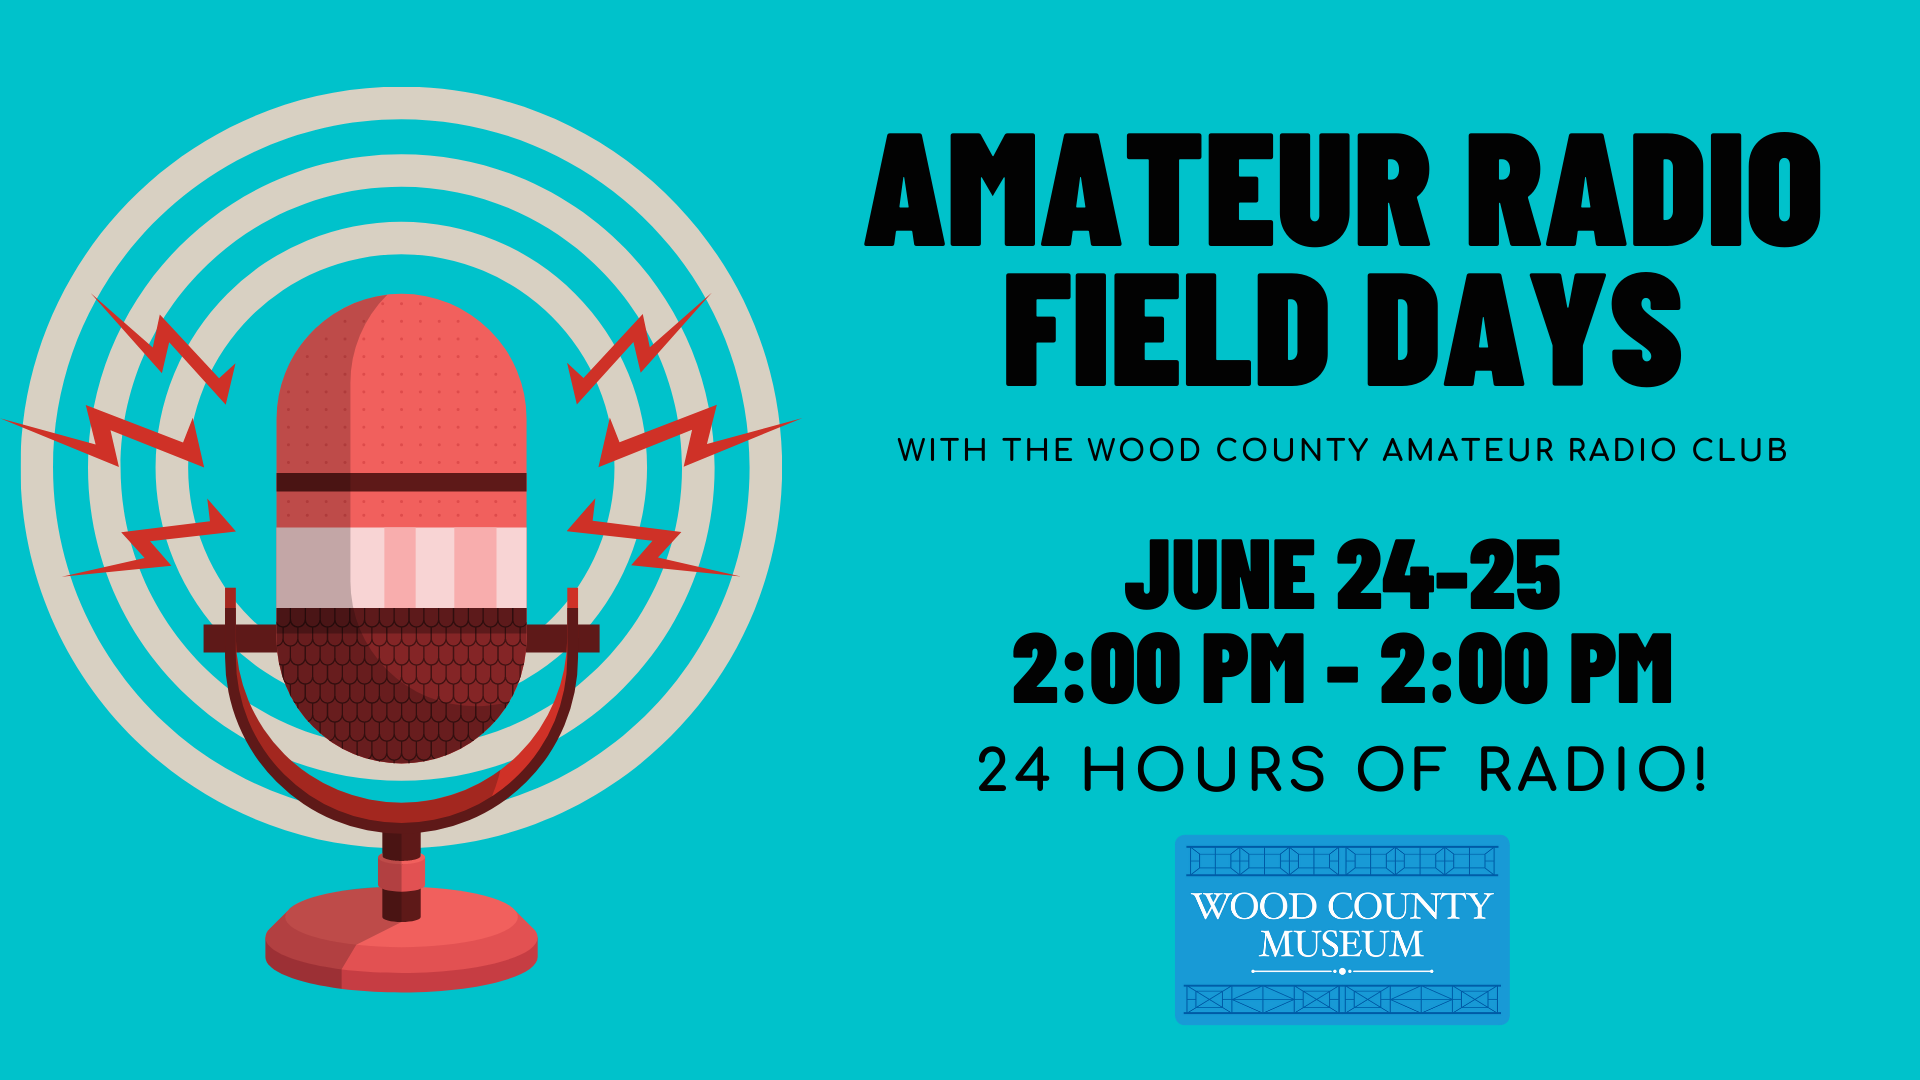 Demonstration Day Amateur Radio Field Days Wood County Museum